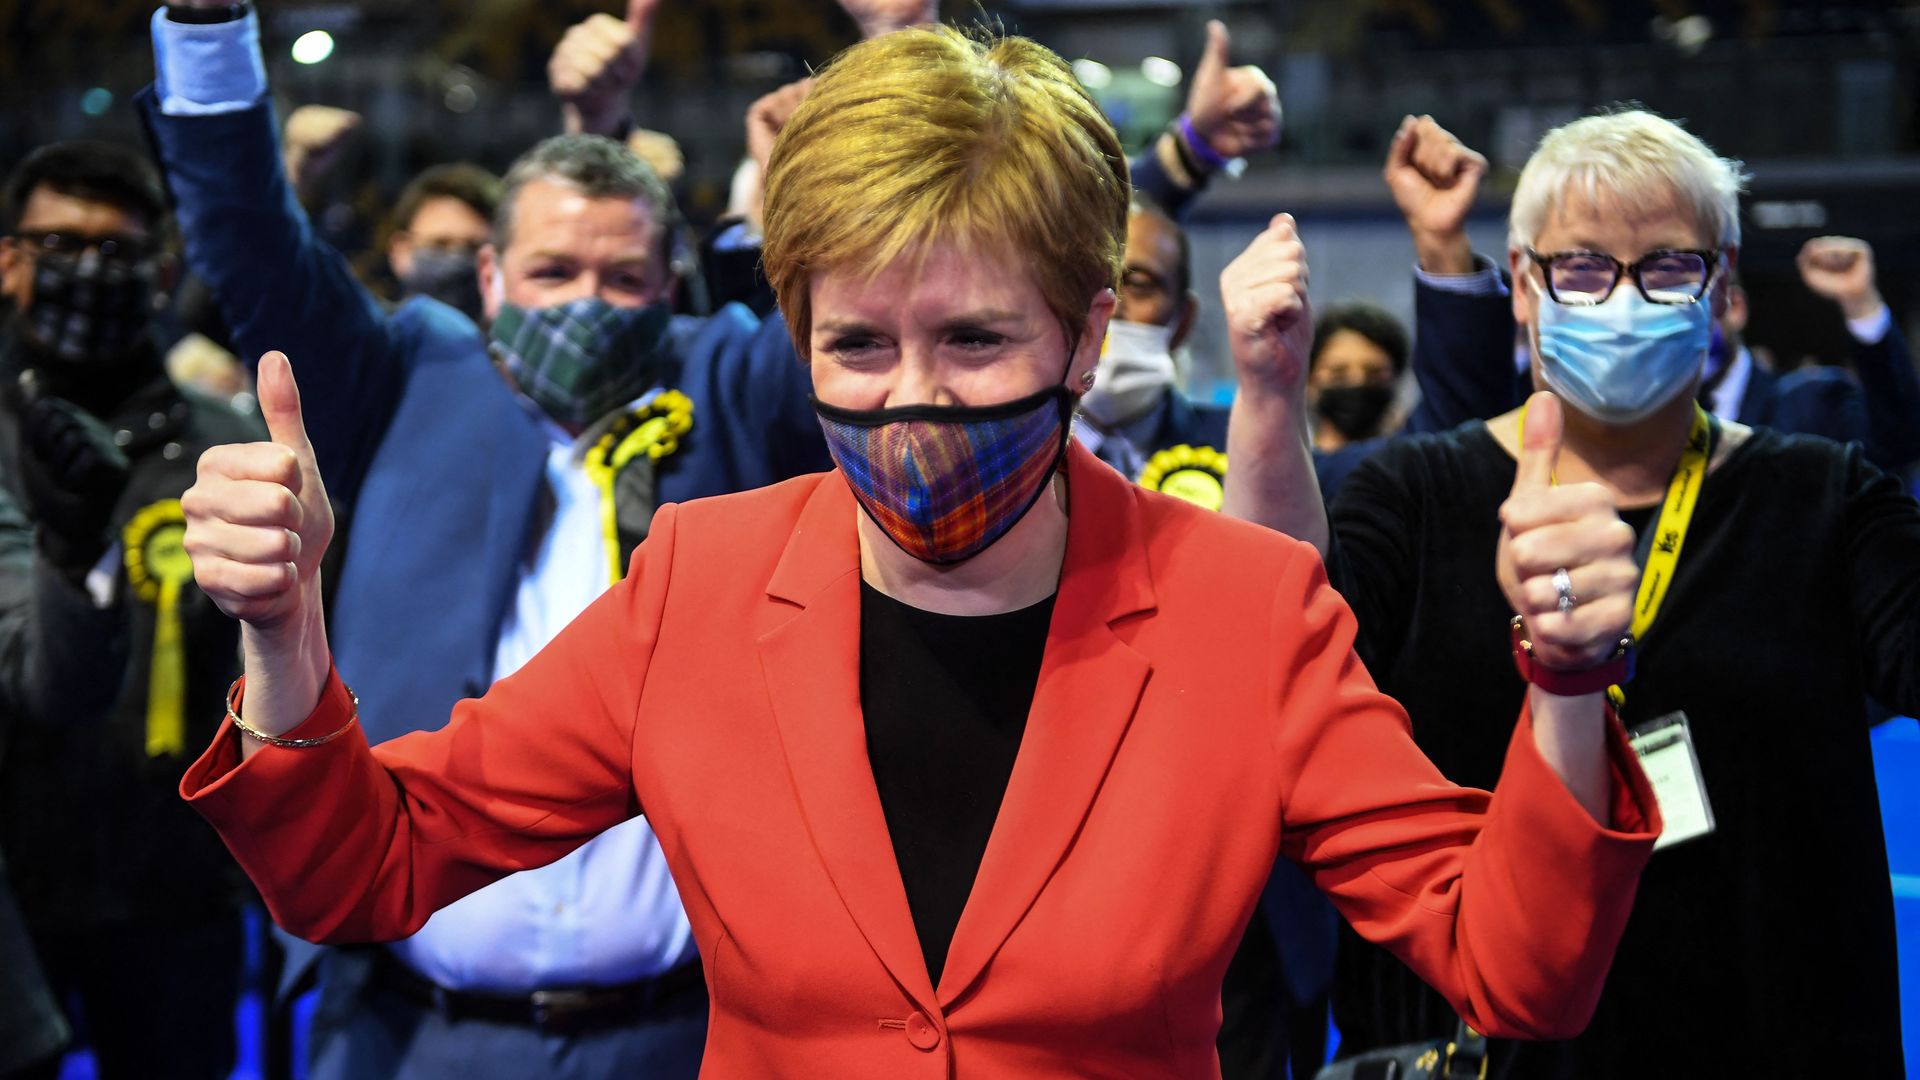 Scotland's First Minister and leader of the Scottish National Party (SNP), Nicola Sturgeon reacts after being declared the winner of the Glasgow Southside seat at Glasgow 